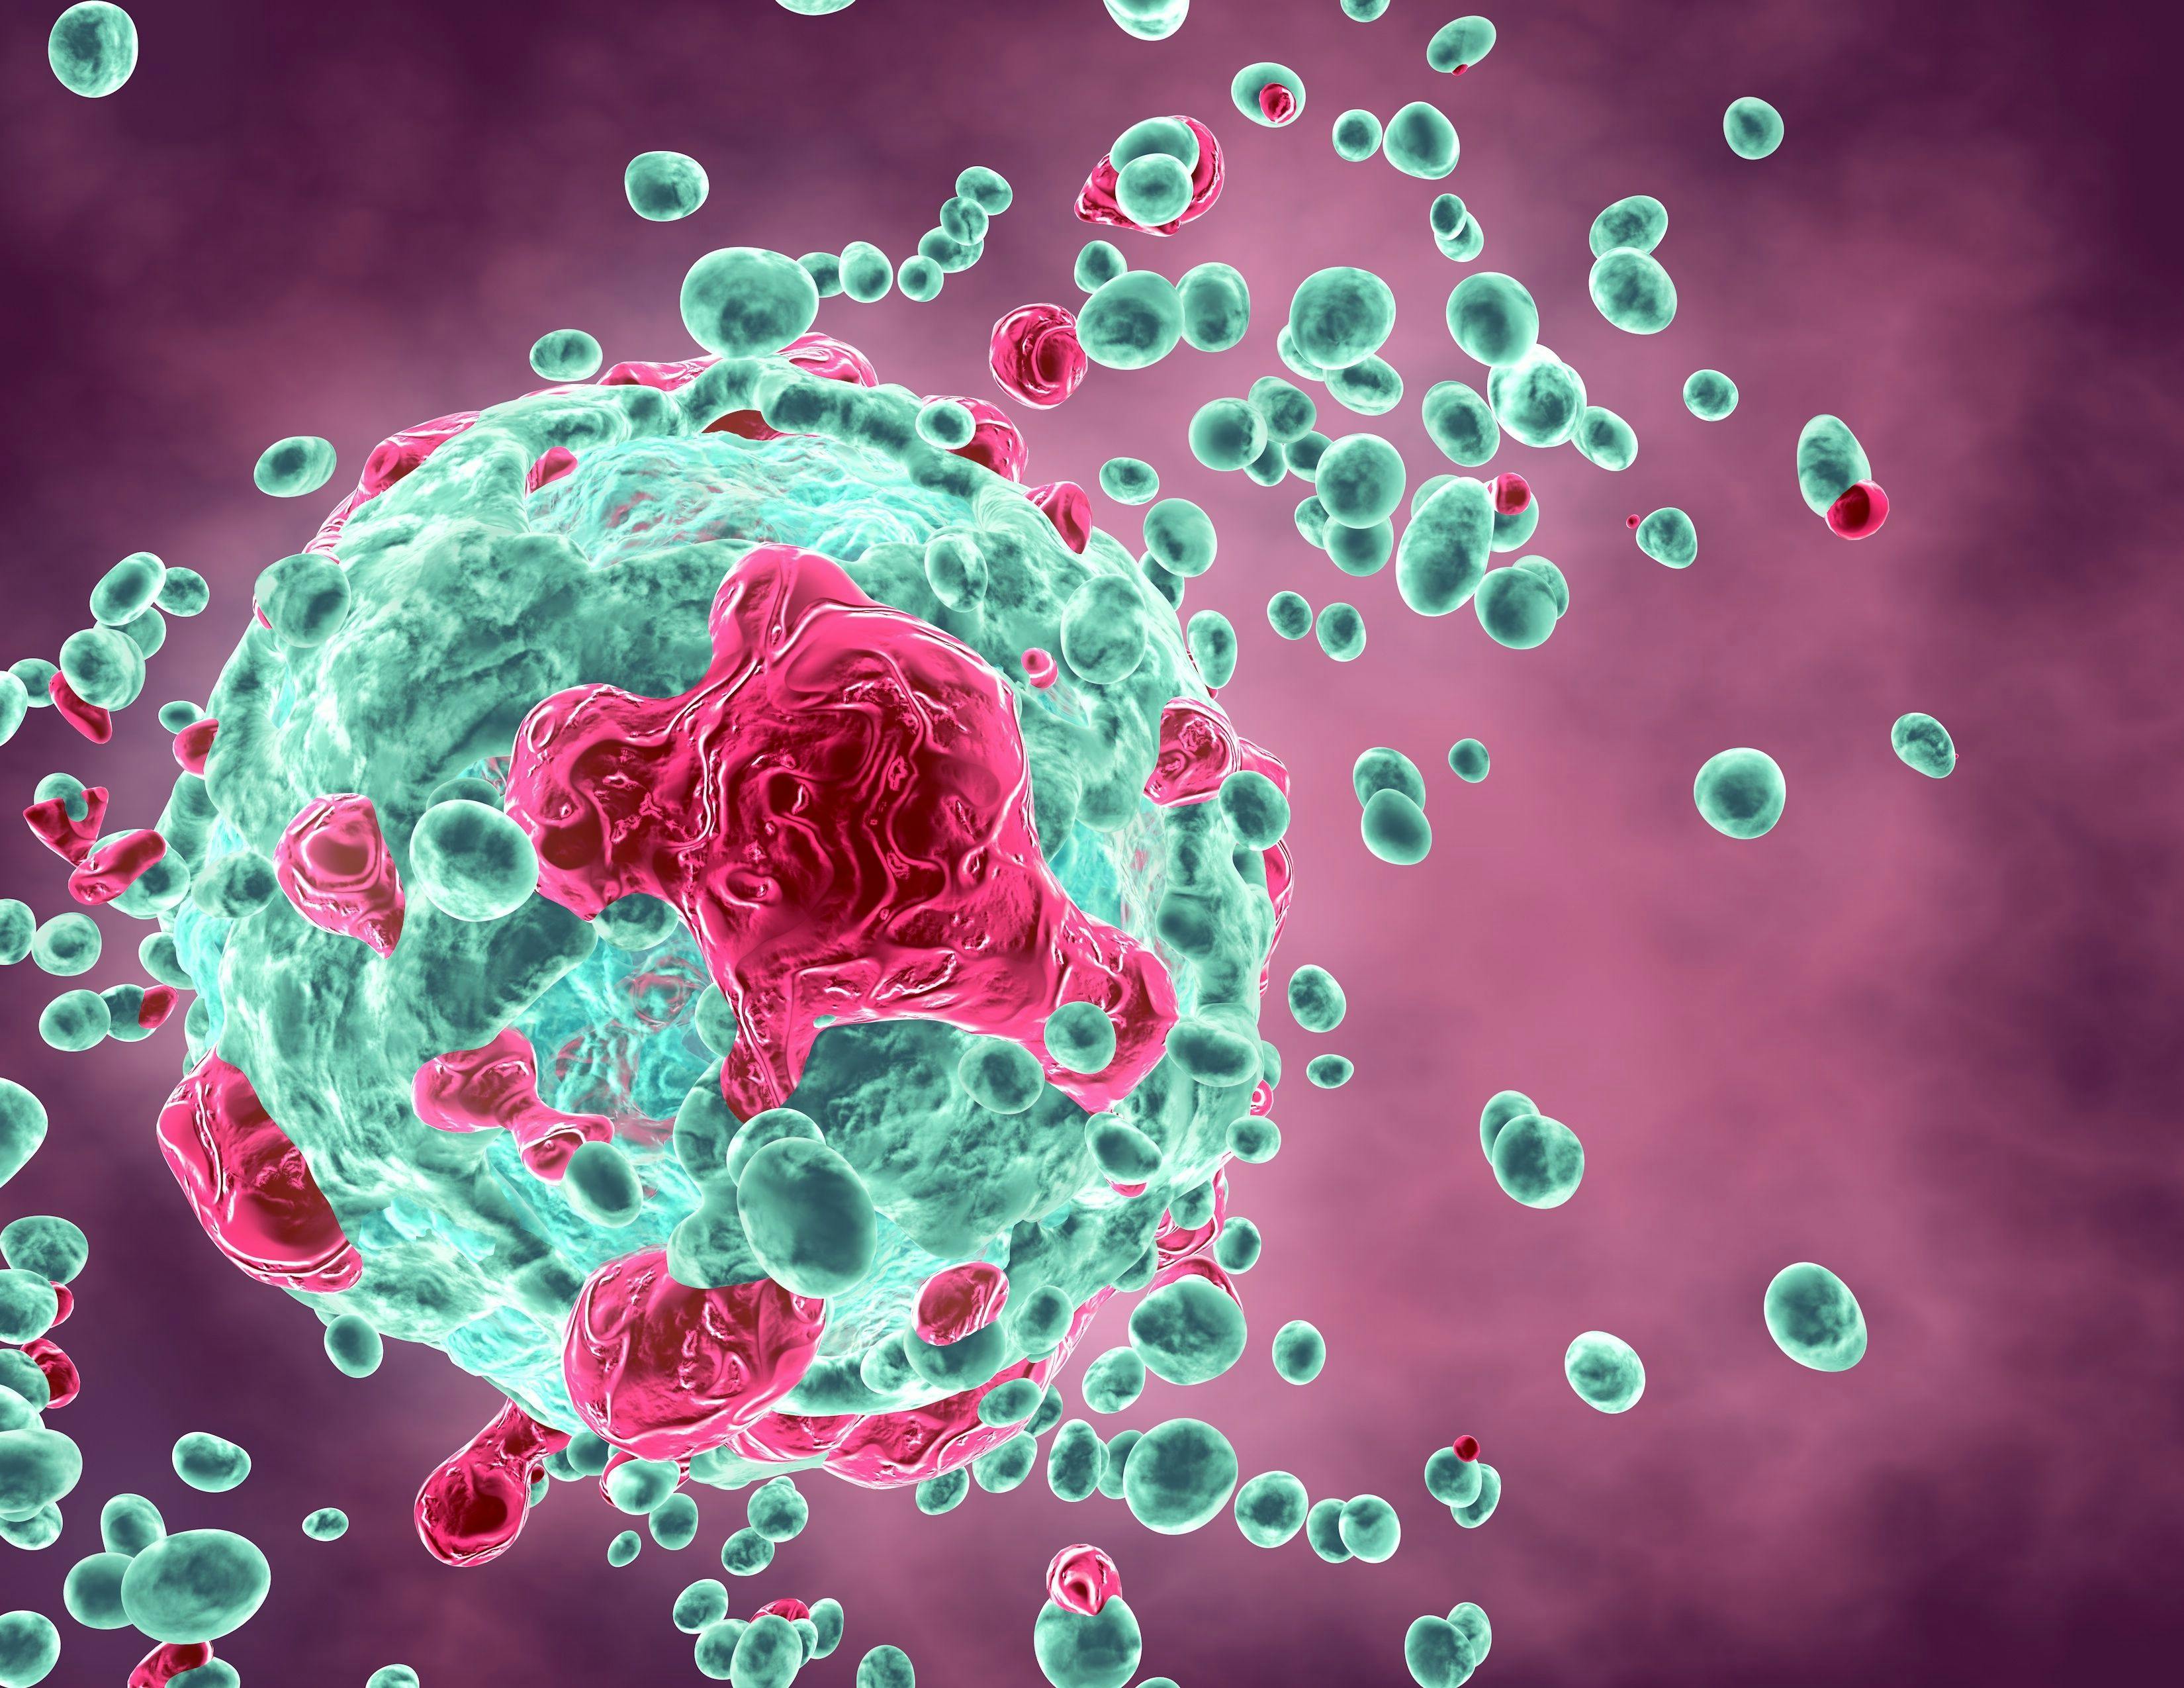 New Study Identifies Different Approach to Attack Herpesviruses